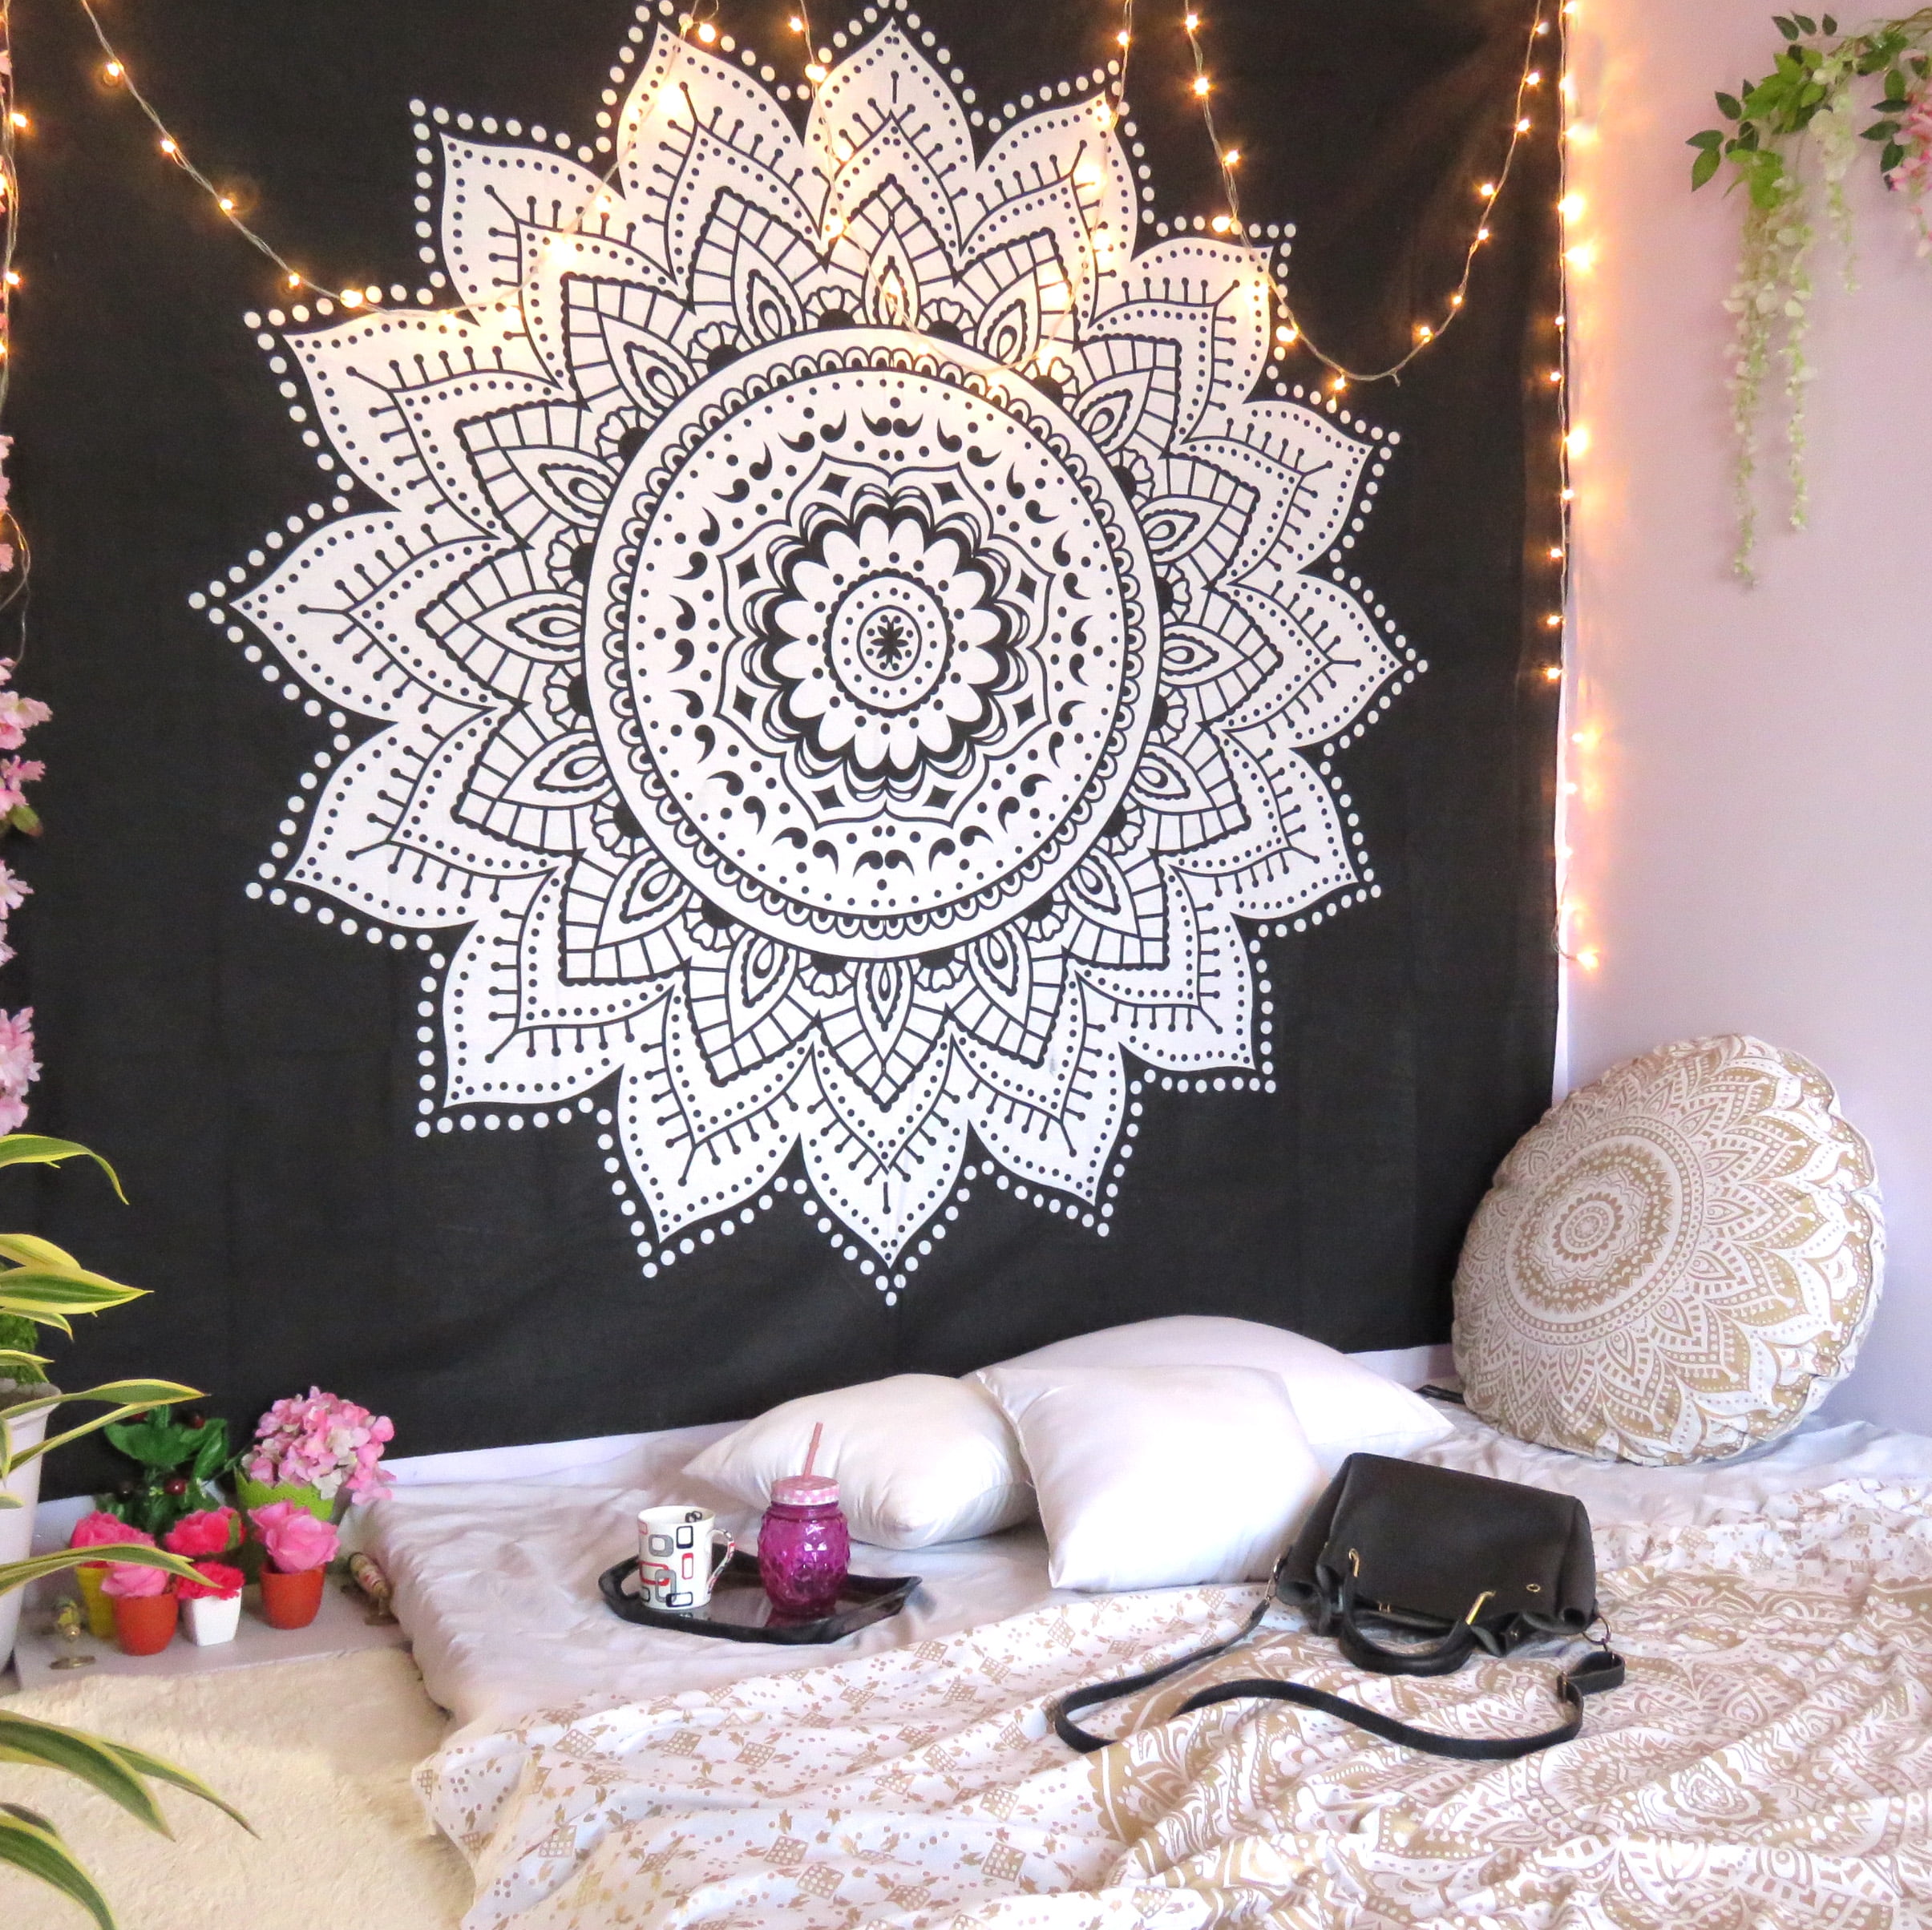 WALL DECOR HIPPIE TAPESTRIES BOHEMIAN MANDALA TAPESTRY QUEEN INDIAN WALL HANGING 